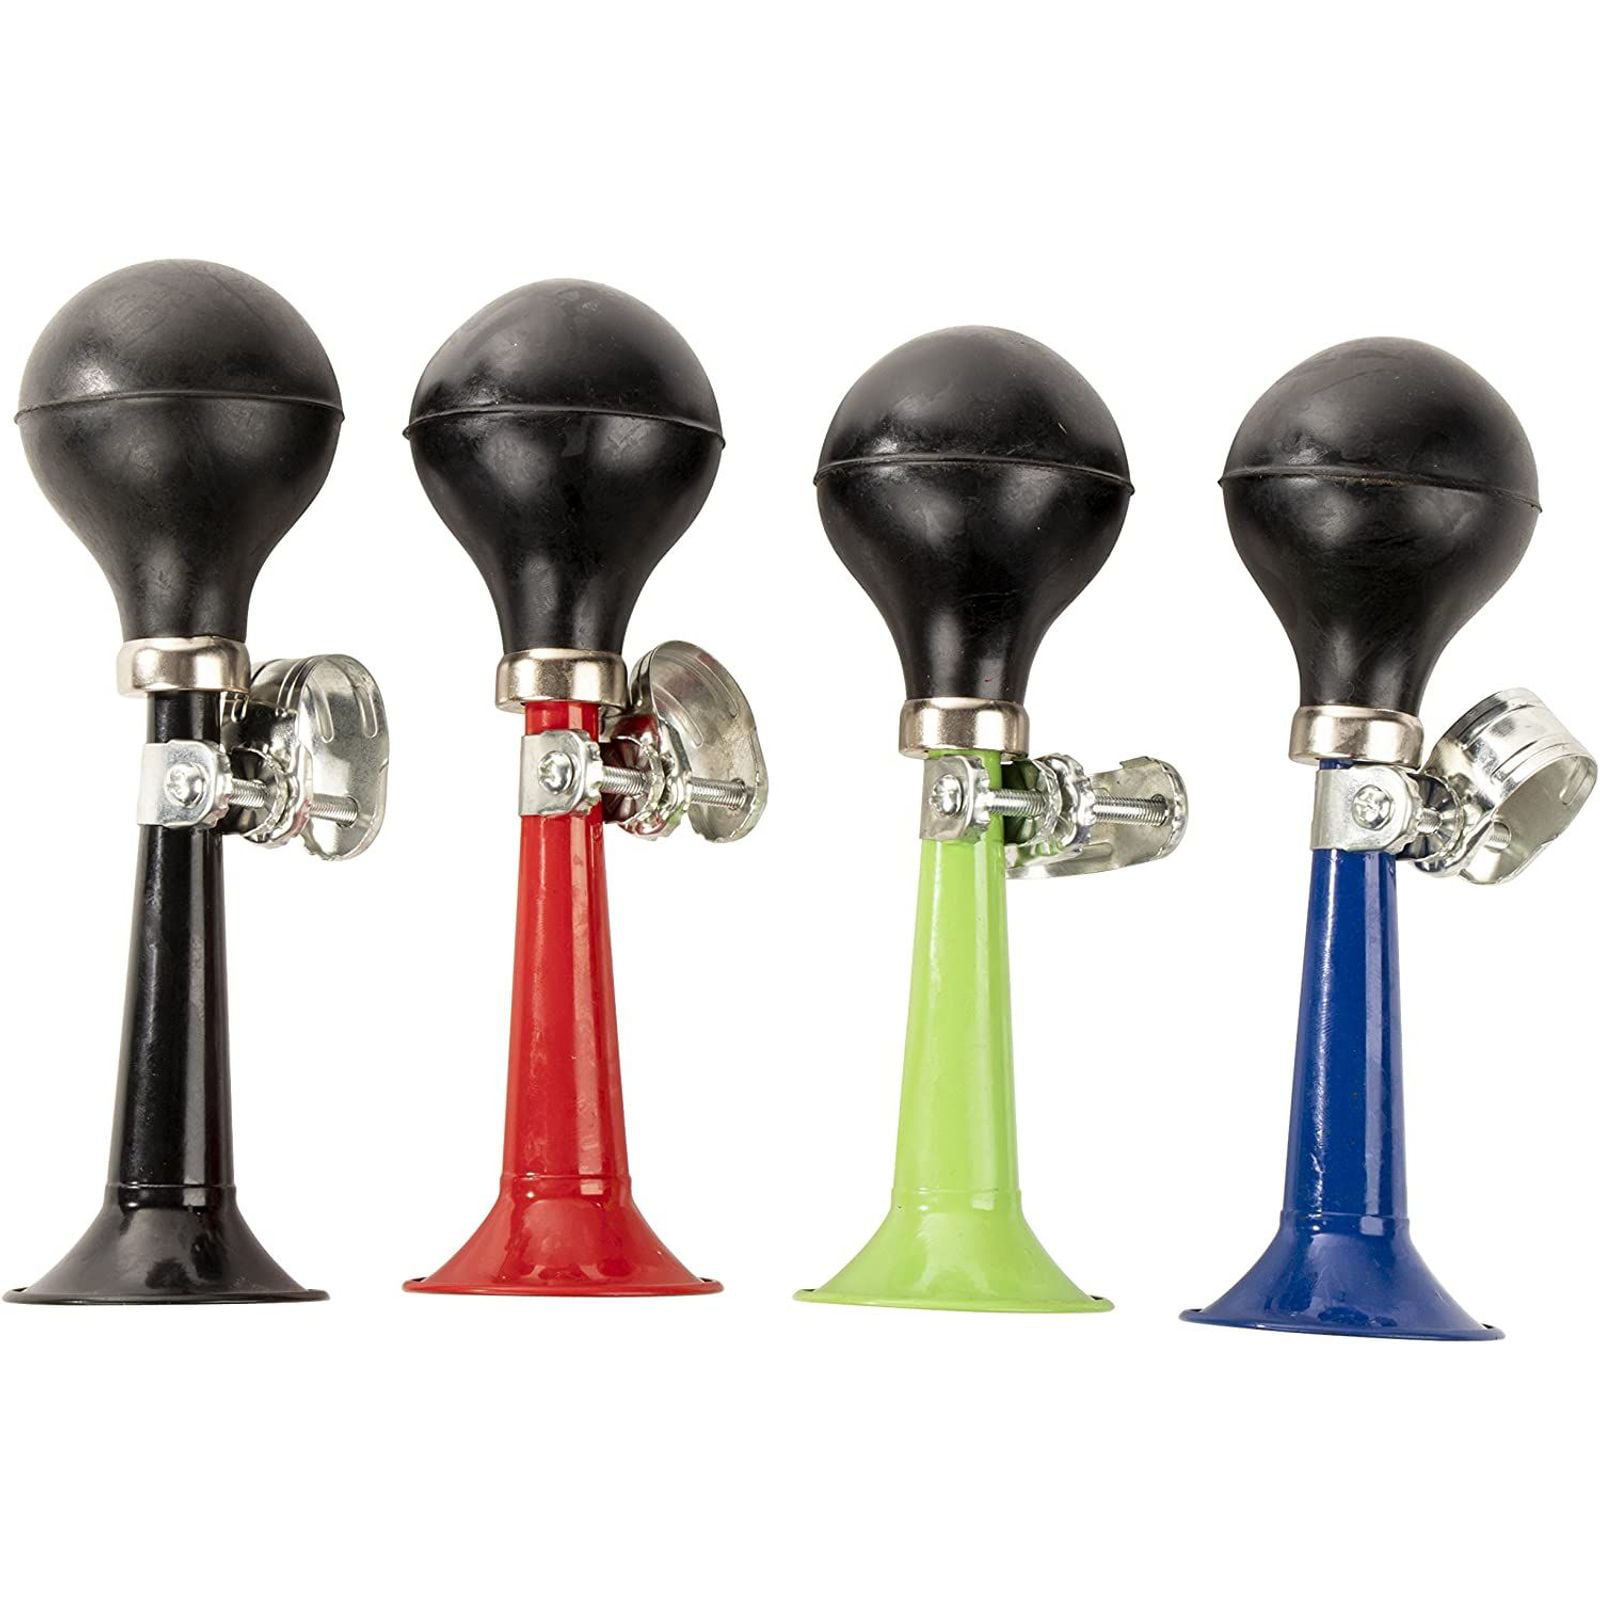 Bicycle Bike Air Horn Clown Sound Hooter Bell Classic Rubber Squeeze Bulb NEW 